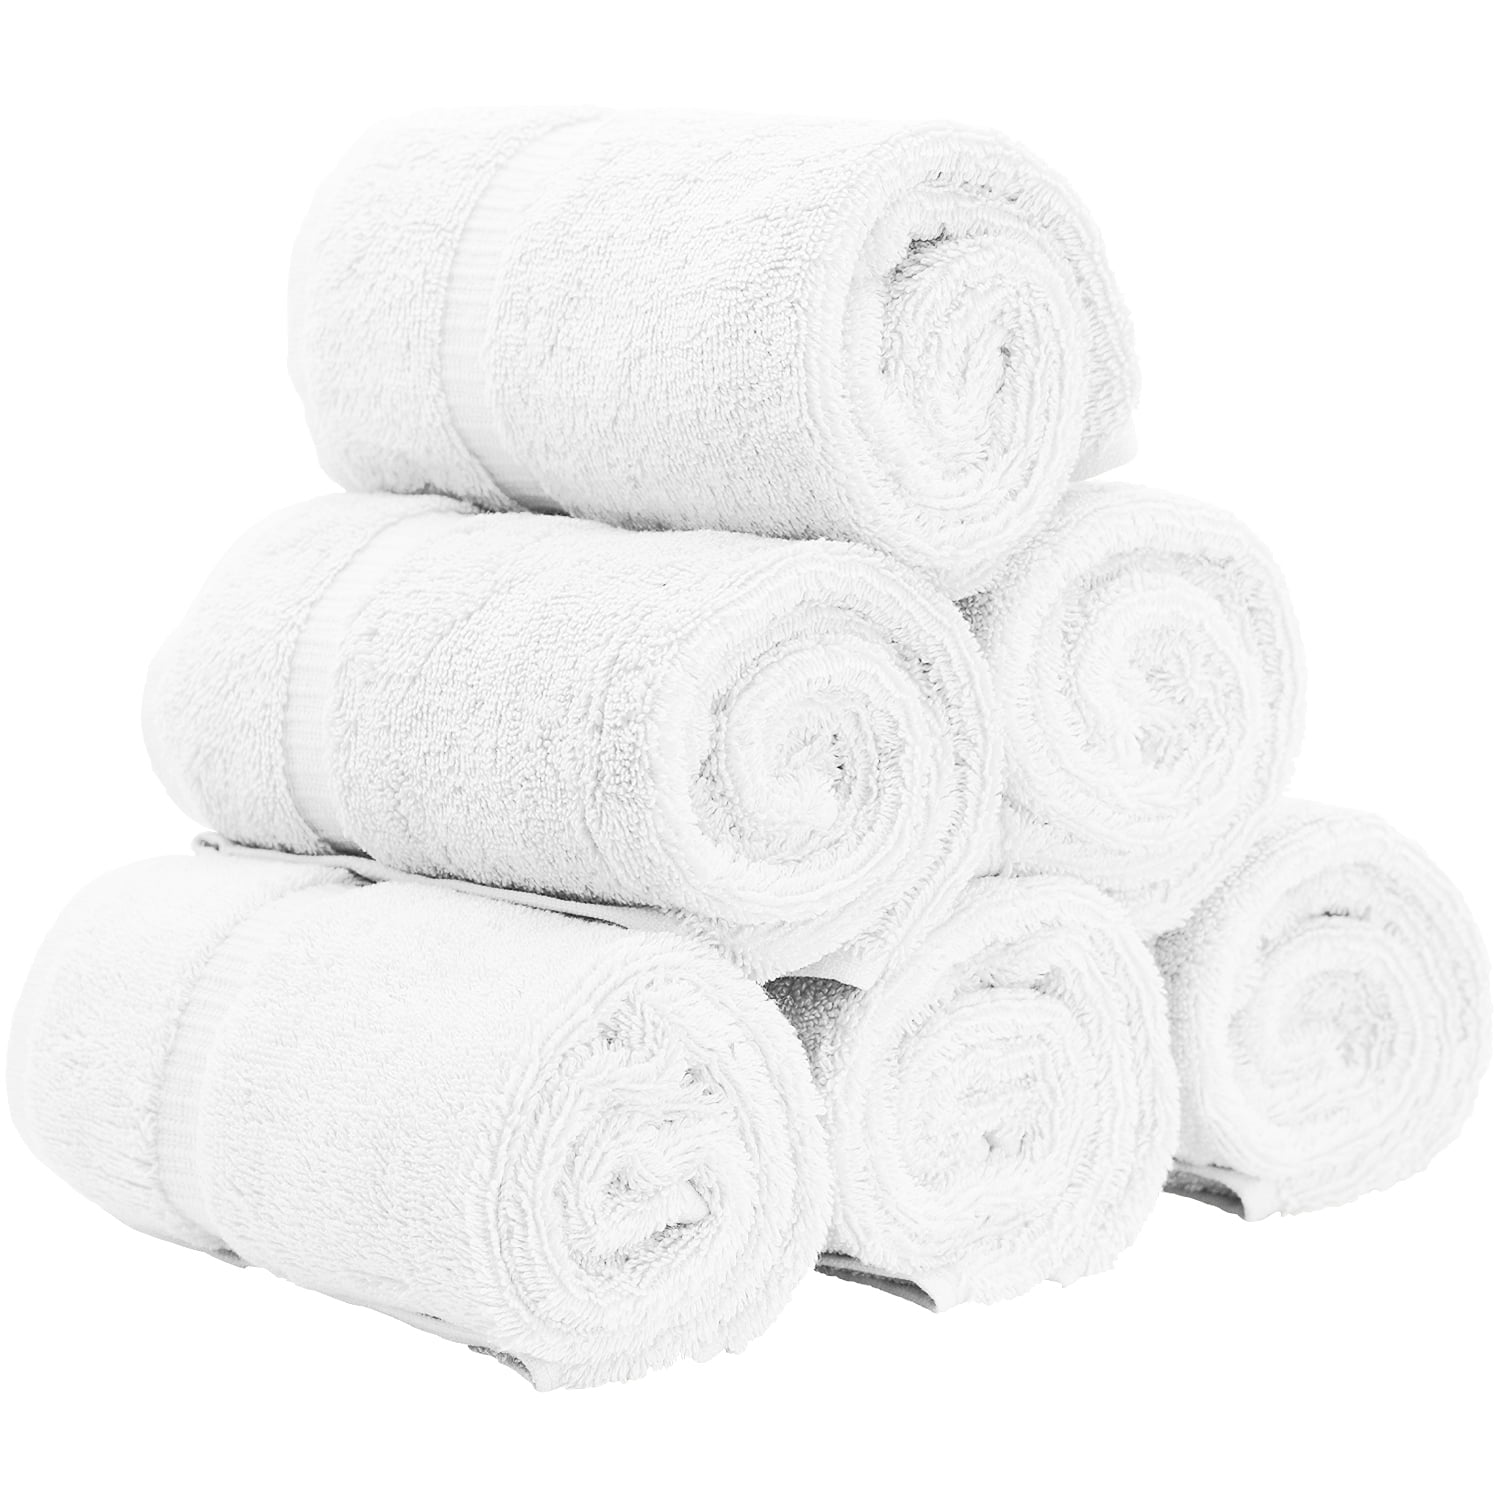 UGG 28142 Pasha Cotton 2-Piece Hand Towel Soft Fluffy Luxury Highly  Absorbent Spa-Like Hotel Luxurious Machine Washable Towels, Hand 28 x  16-inch